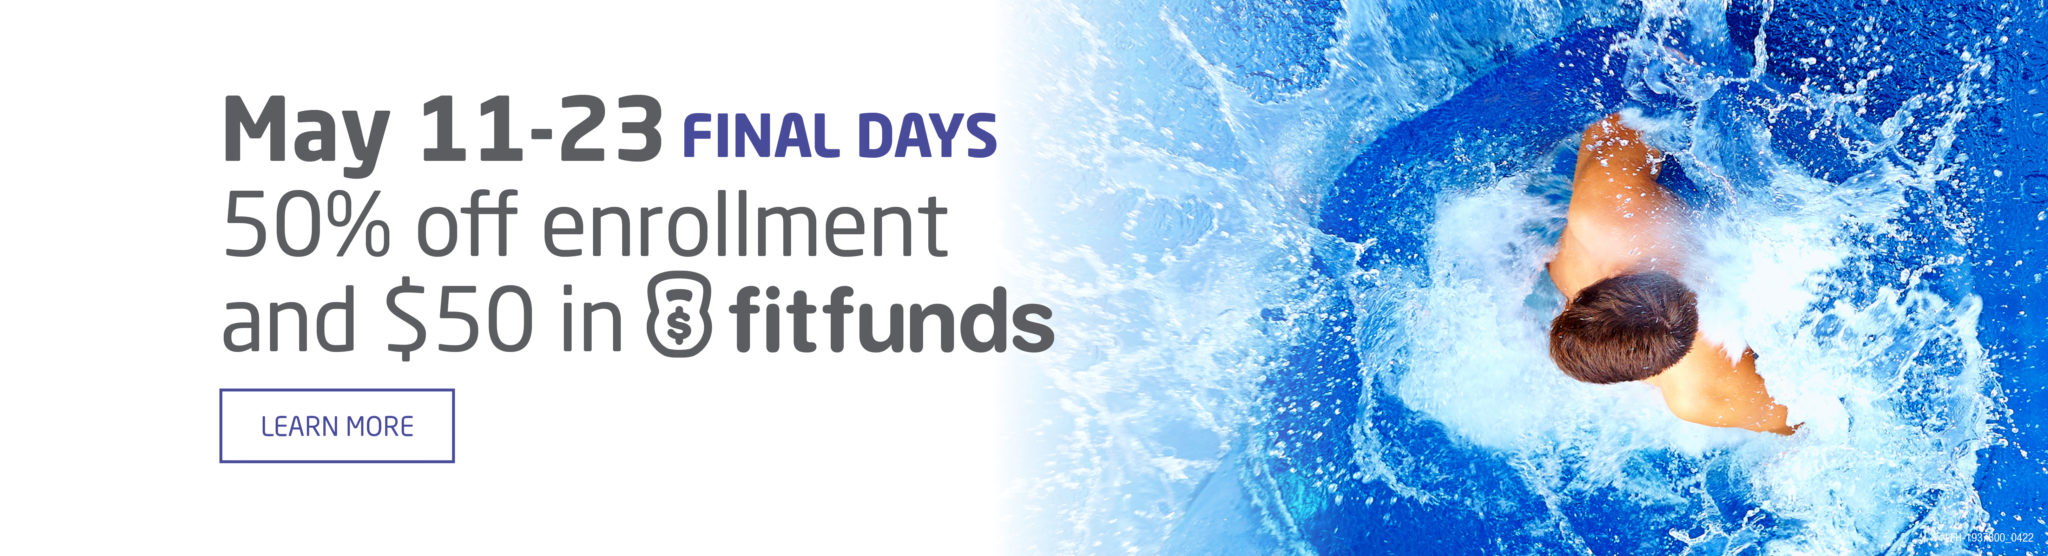 Final days of savings! 50% Off Enrollment and $50 in FitFunds